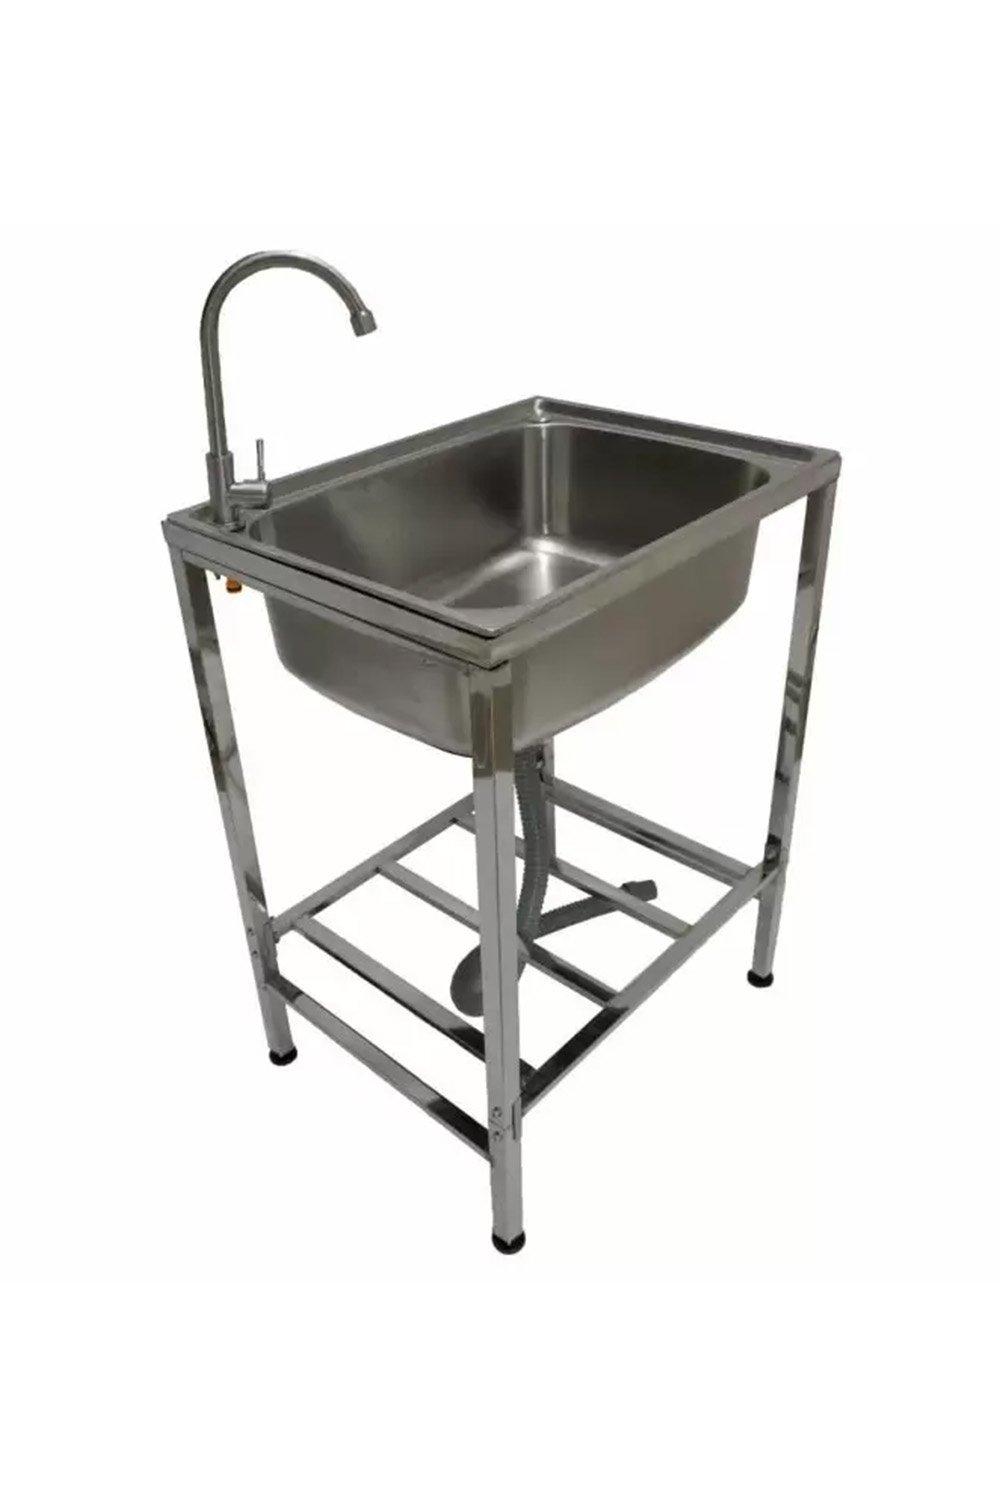 Stainless Steel Camping Sink - Portable